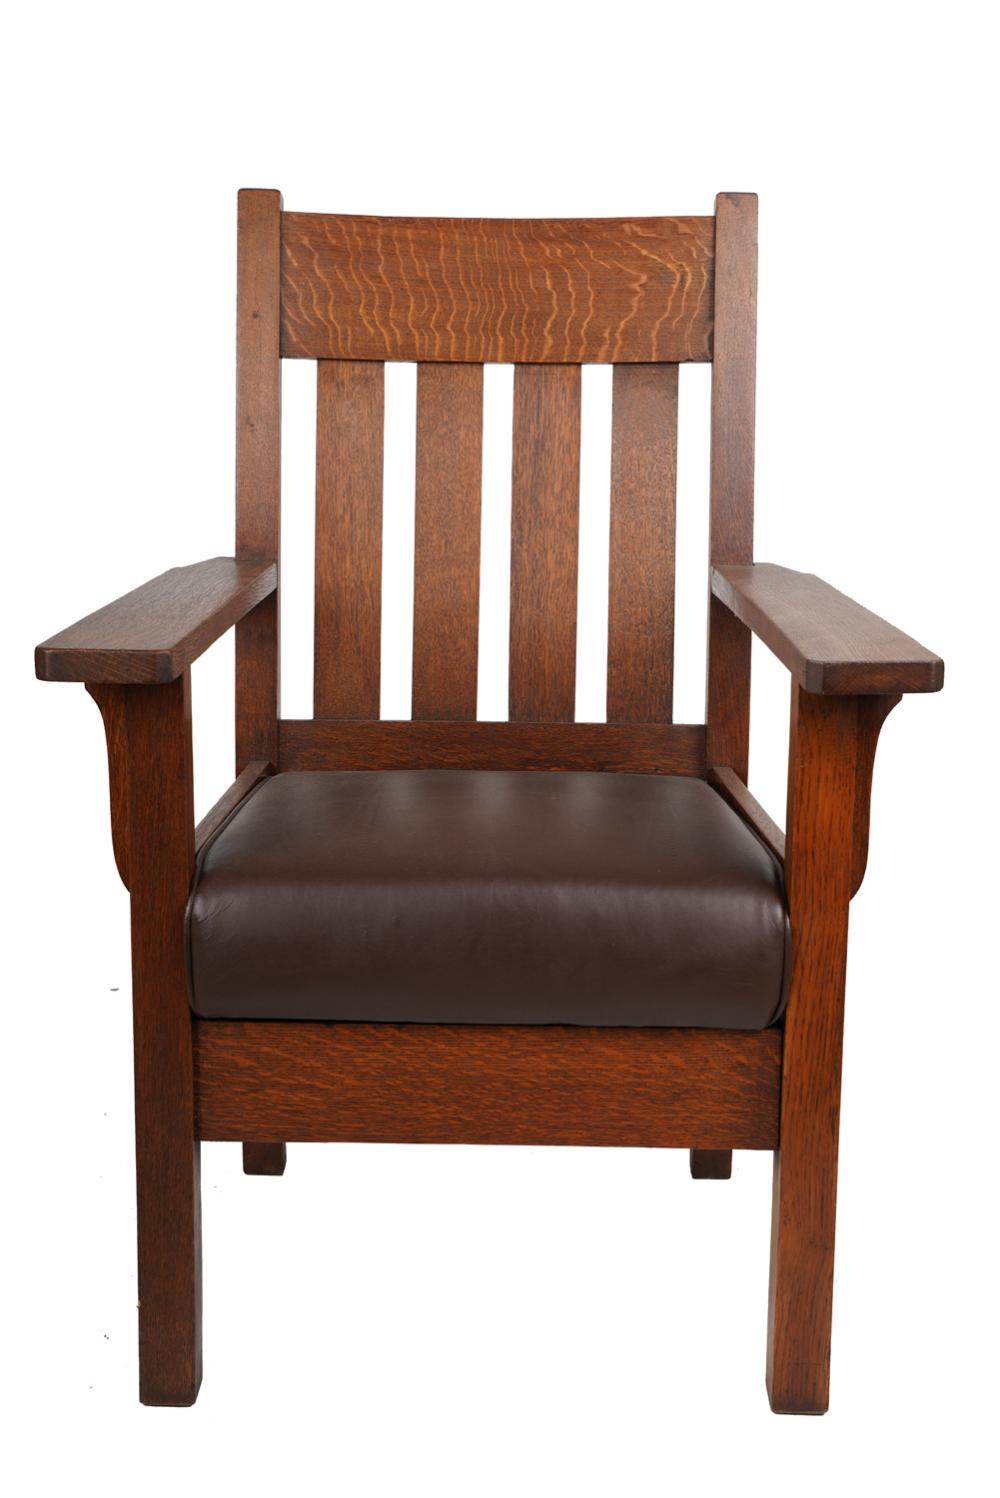 CRAFTSMAN ARMCHAIRProvenance The 335d1a